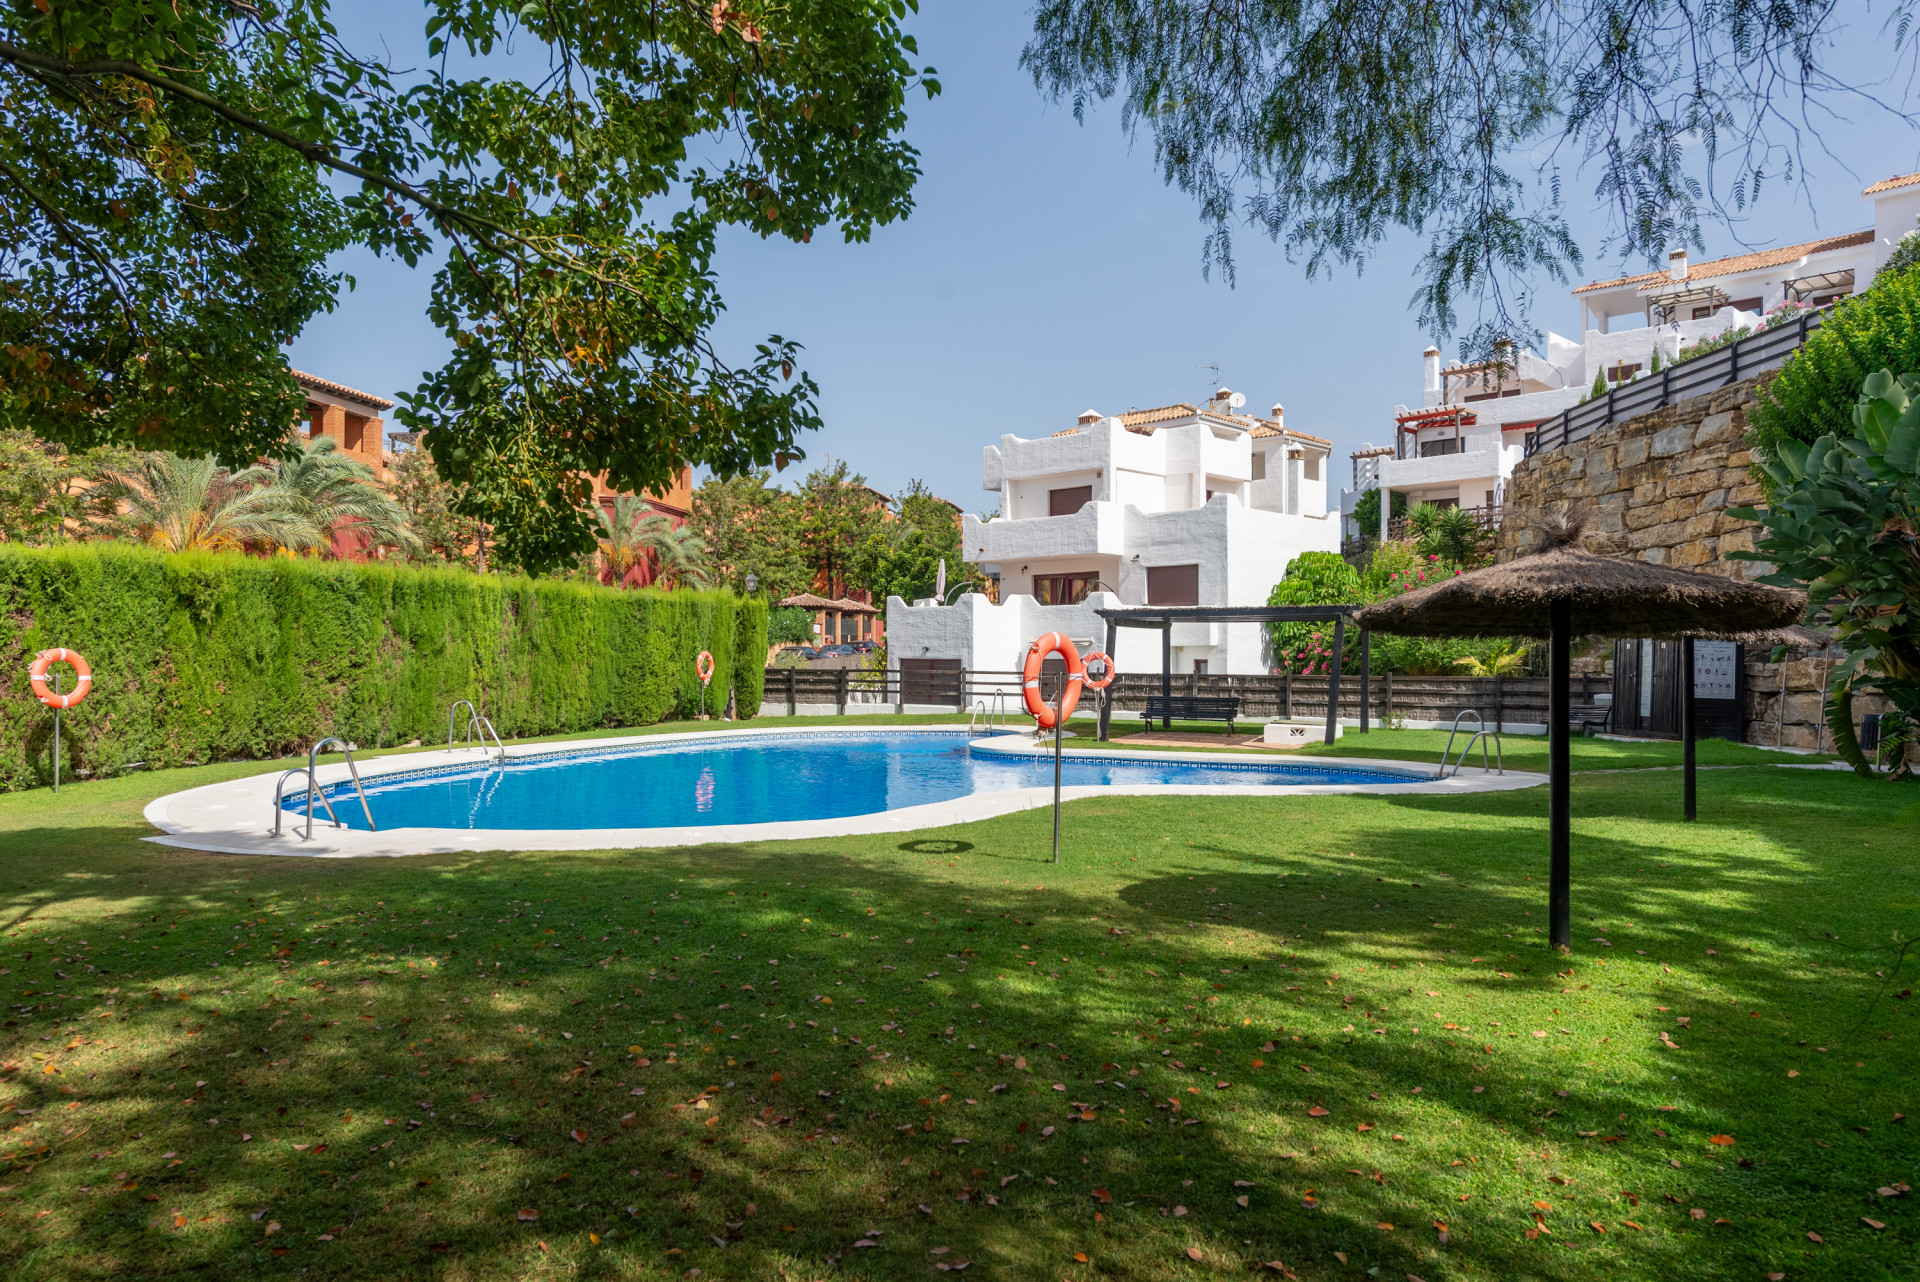 Ground floor flat with large garden and terrace, in Casares, Malaga, Spain.